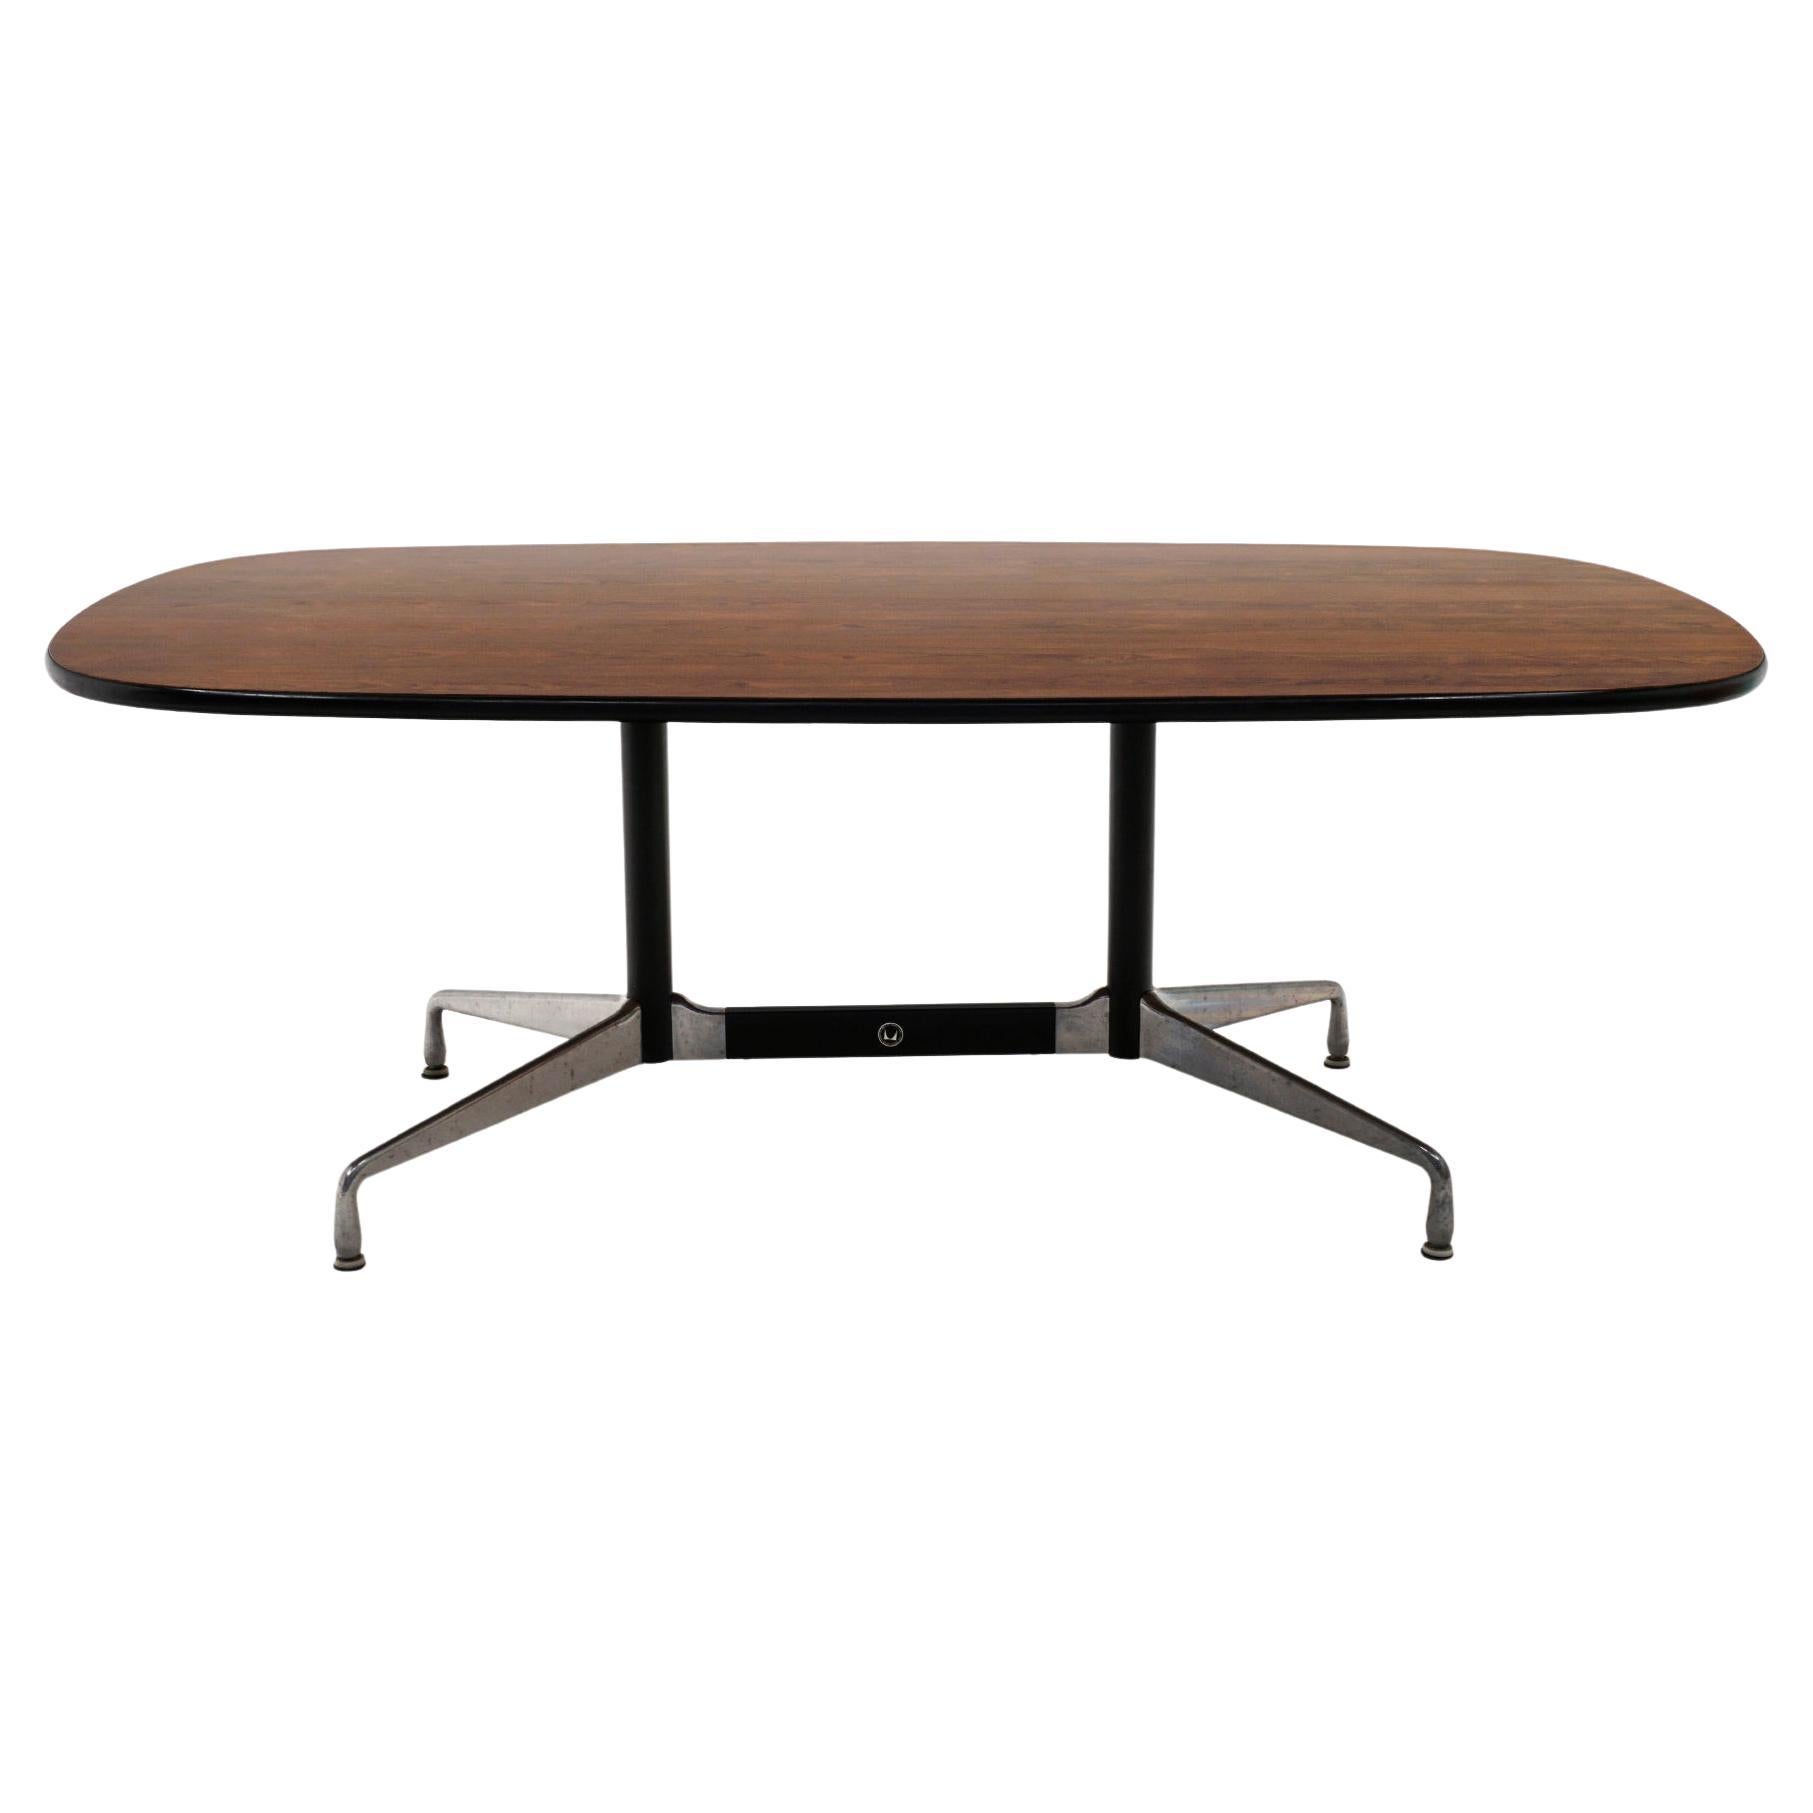 Rare Brazilian rosewood version of the Charles and Ray Eames designed aluminum group dining / conference table. The top is wood and not a laminate. Very good condition with light signs of wear to the top. Aluminum base shows some areas of